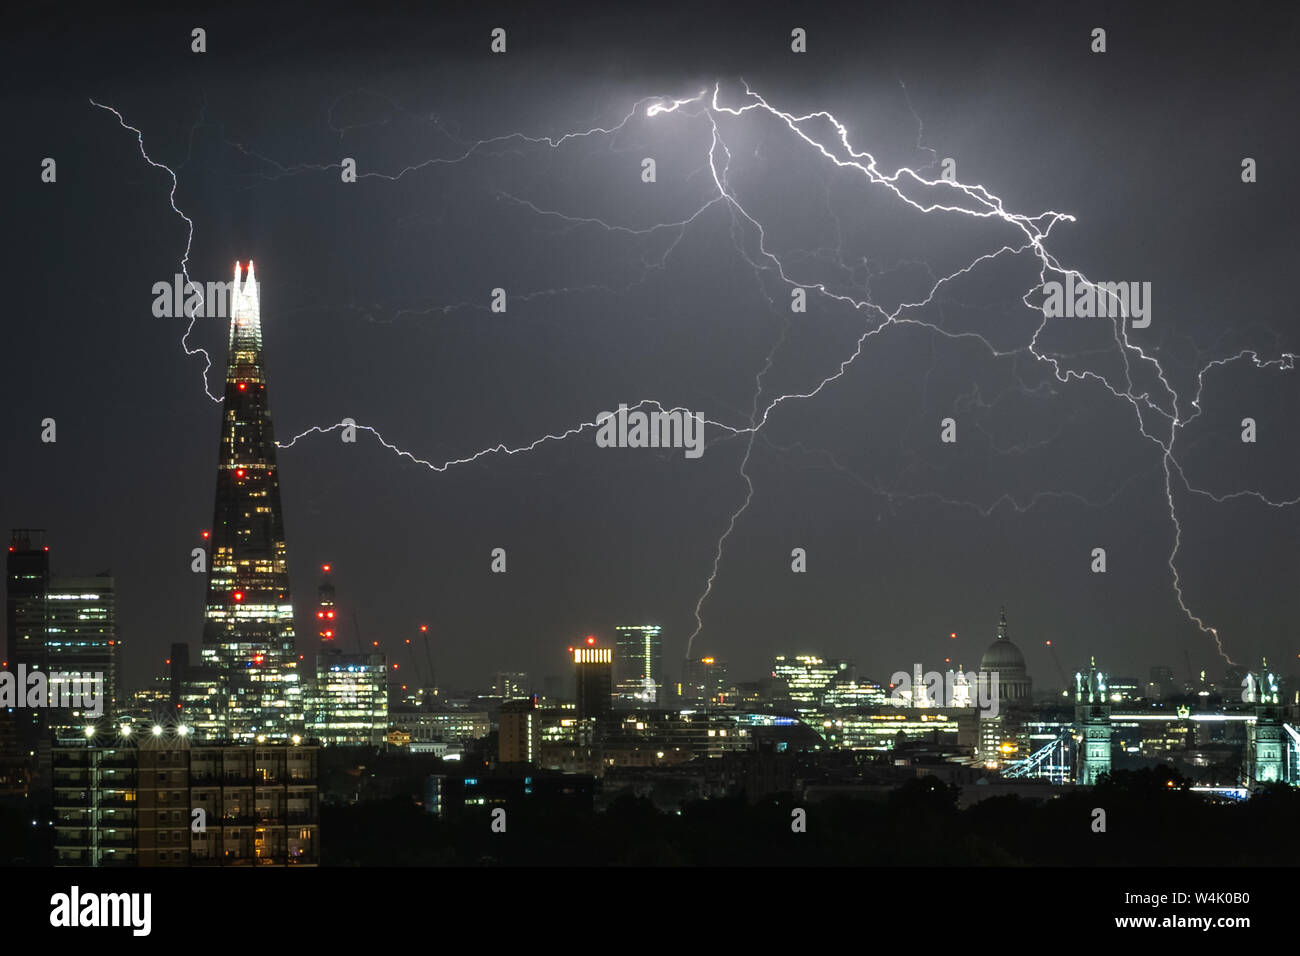 London, UK. 24th July, 2019. UK Weather: Dramatic lightning strikes over the city landscape including The Shard skyscraper building during the early hours. Credit: Guy Corbishley/Alamy Live News Stock Photo